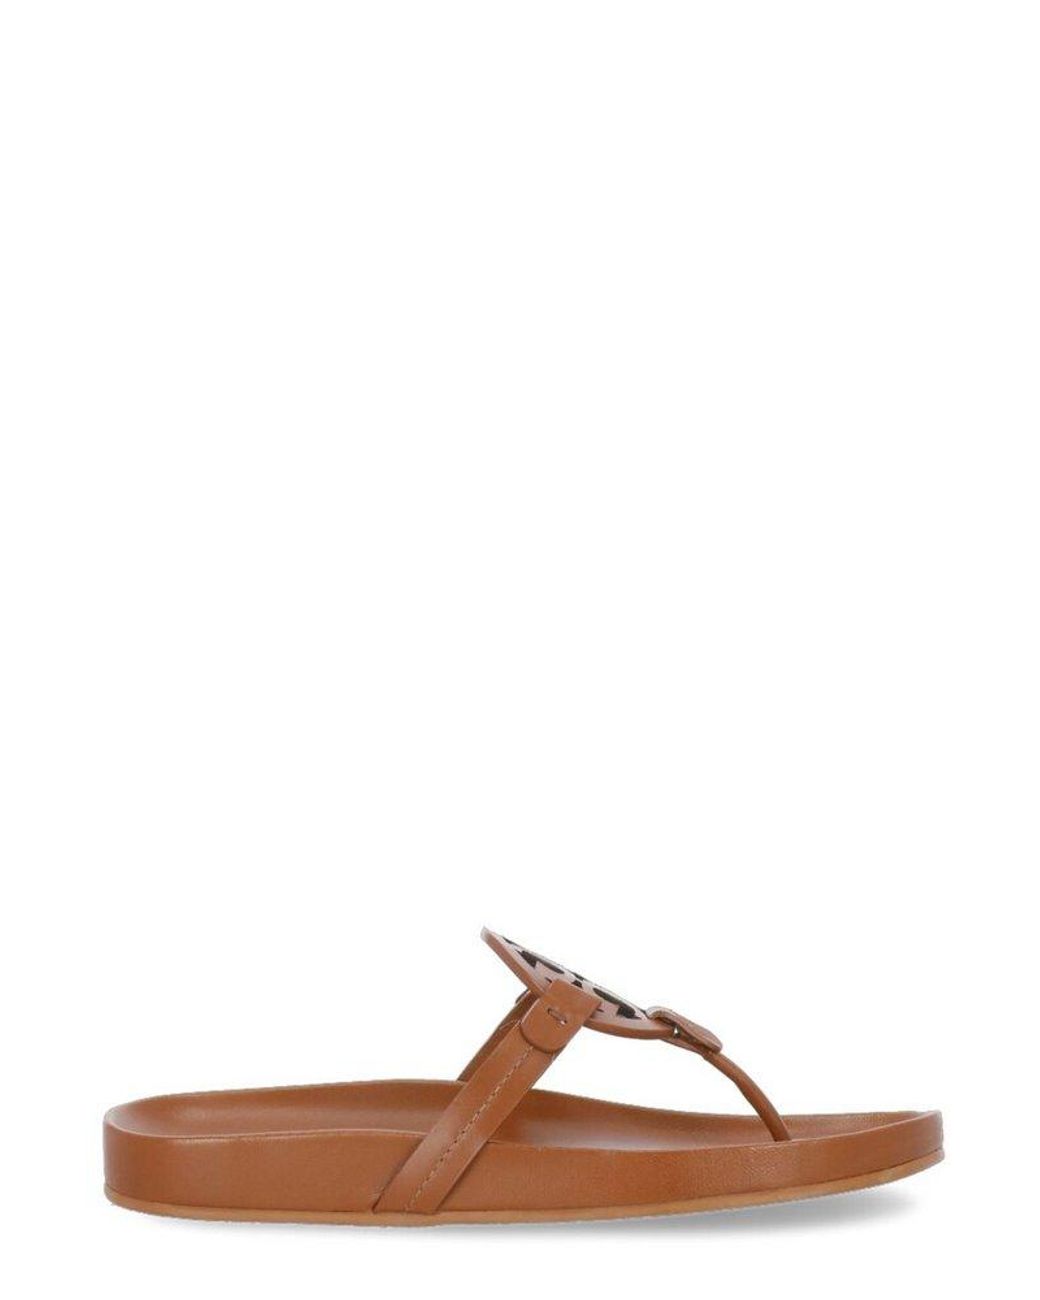 Tory Burch Leather Miller Cloud Sandals in Brown | Lyst Australia